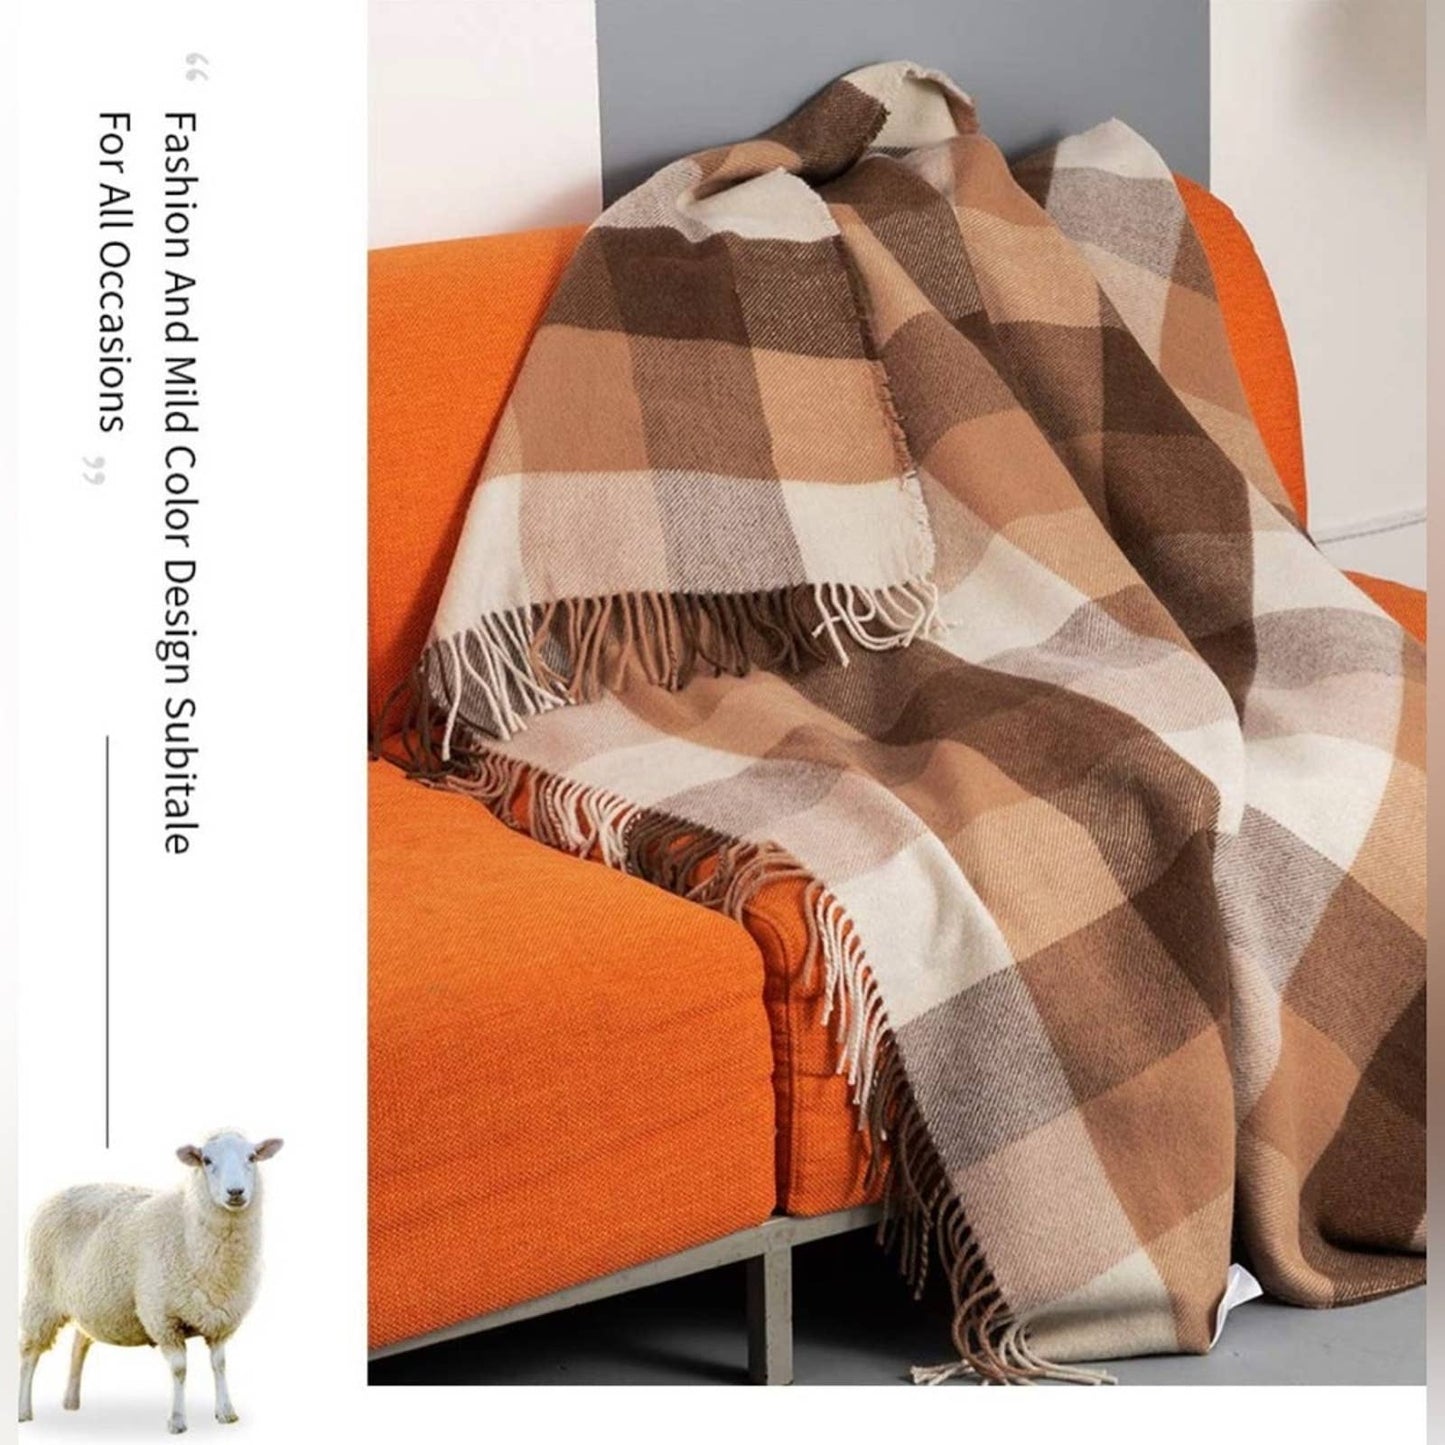 Farridoro Wool Fringe Throw Blanket 51inches with 67inches Decorative All Season